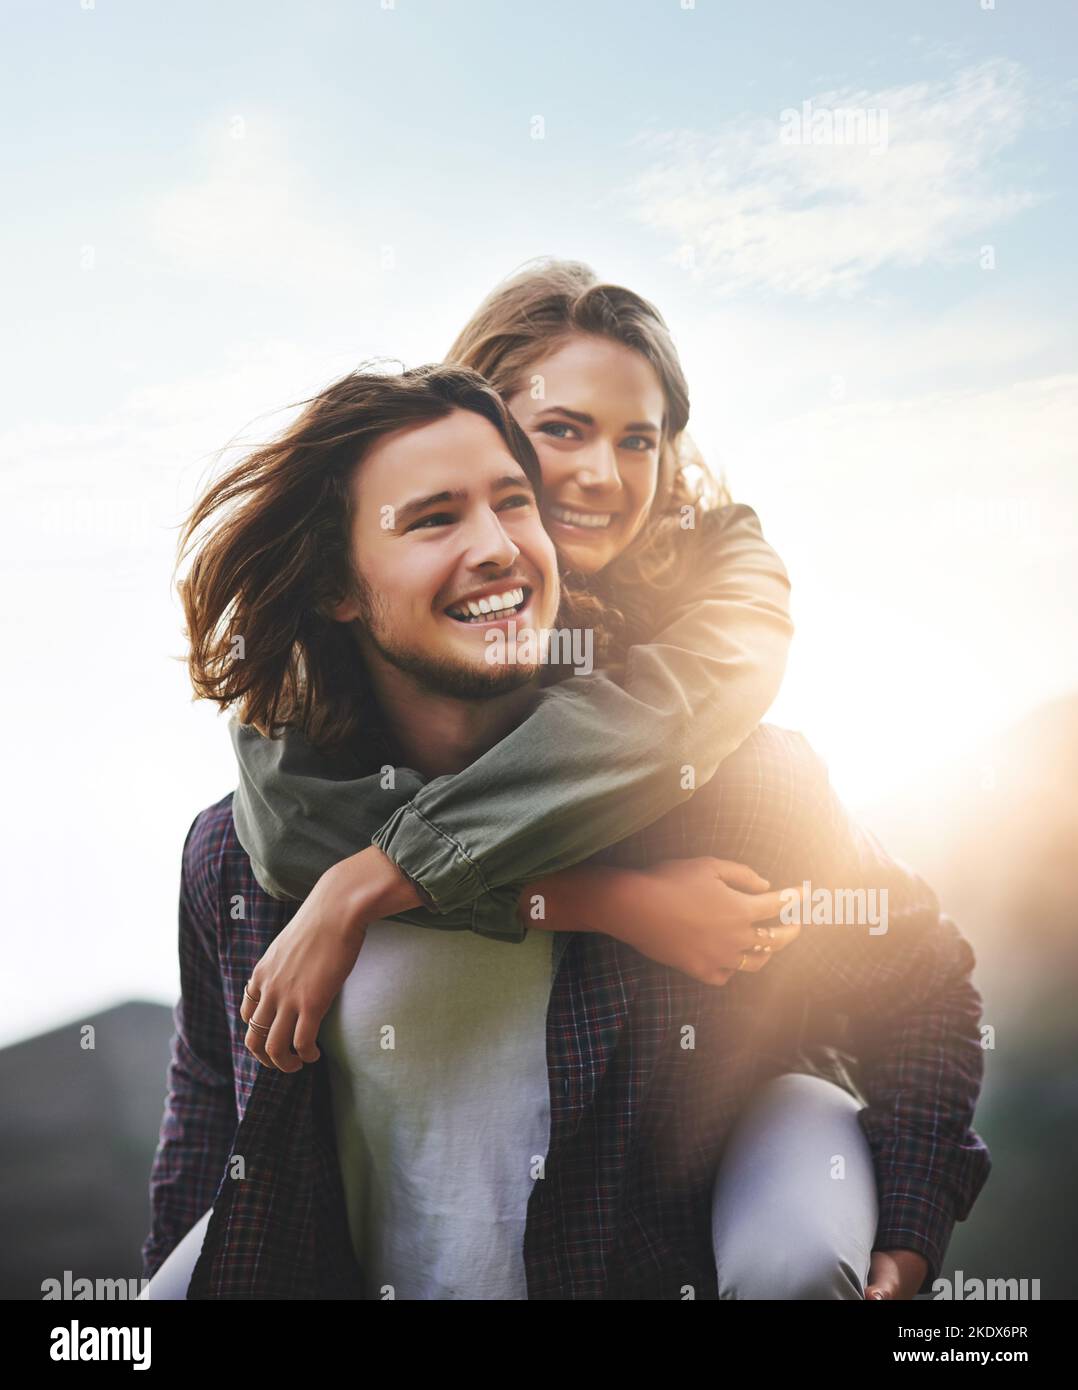 Sunshine days. Portrait of a happy young couple having fun outside. Stock Photo